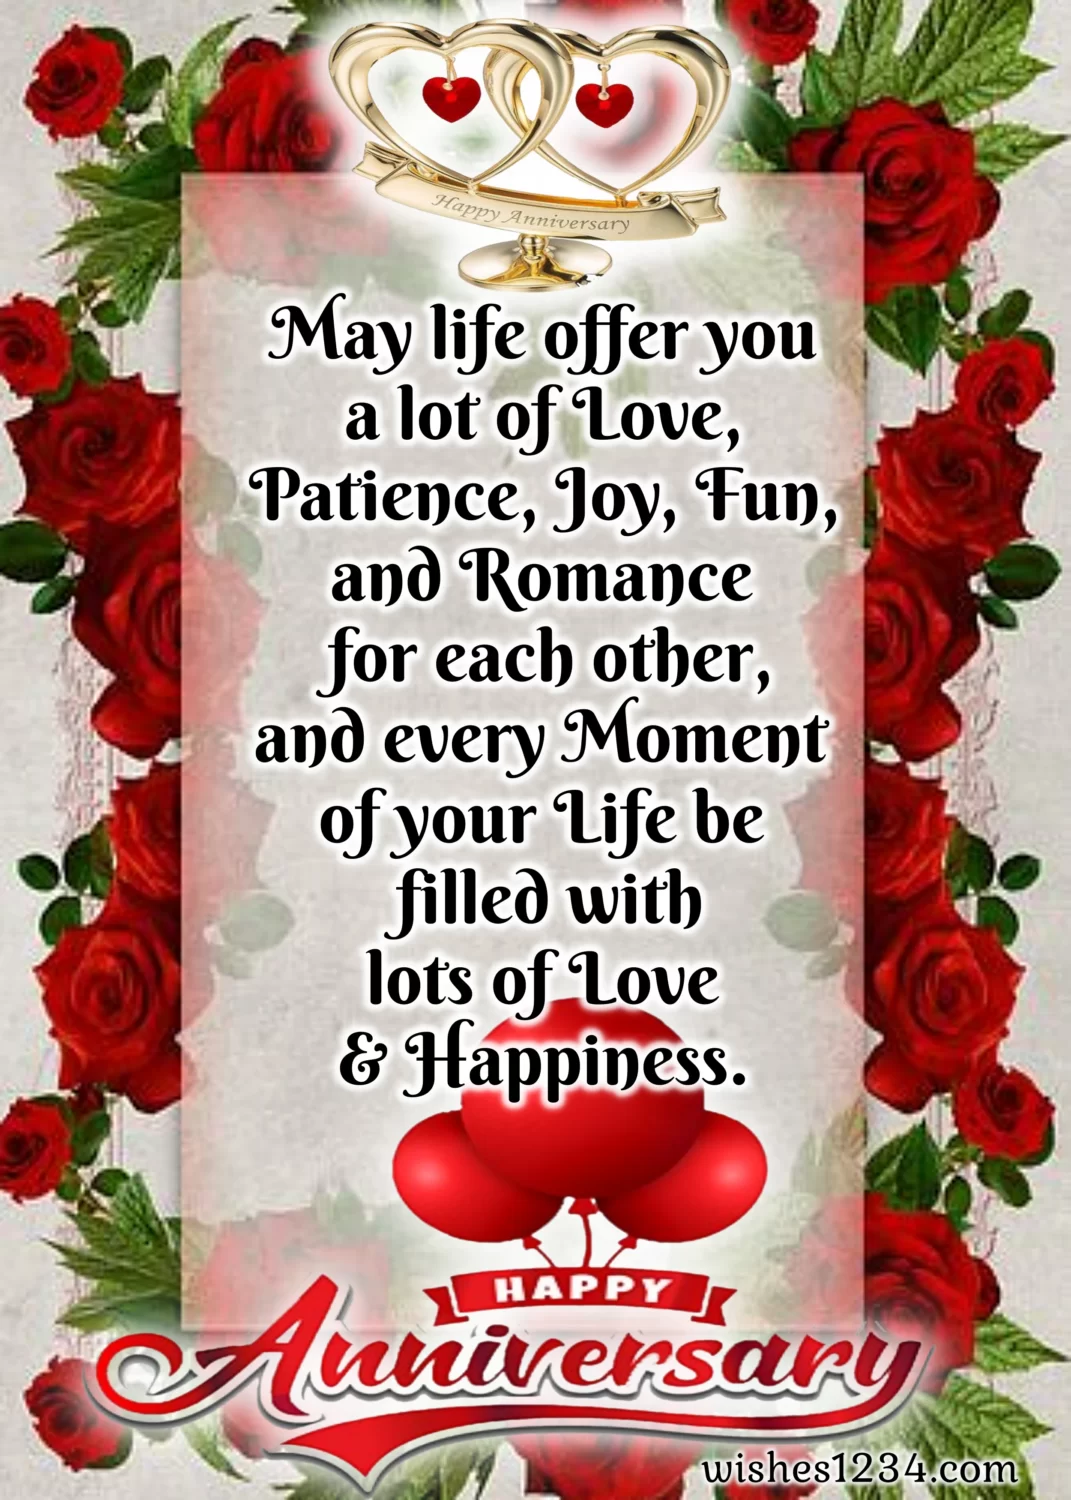 Happy wedding anniversary with rose flowers background, Three red roses with two white hearts, Wedding anniversary quotes, Anniversary Wishes.